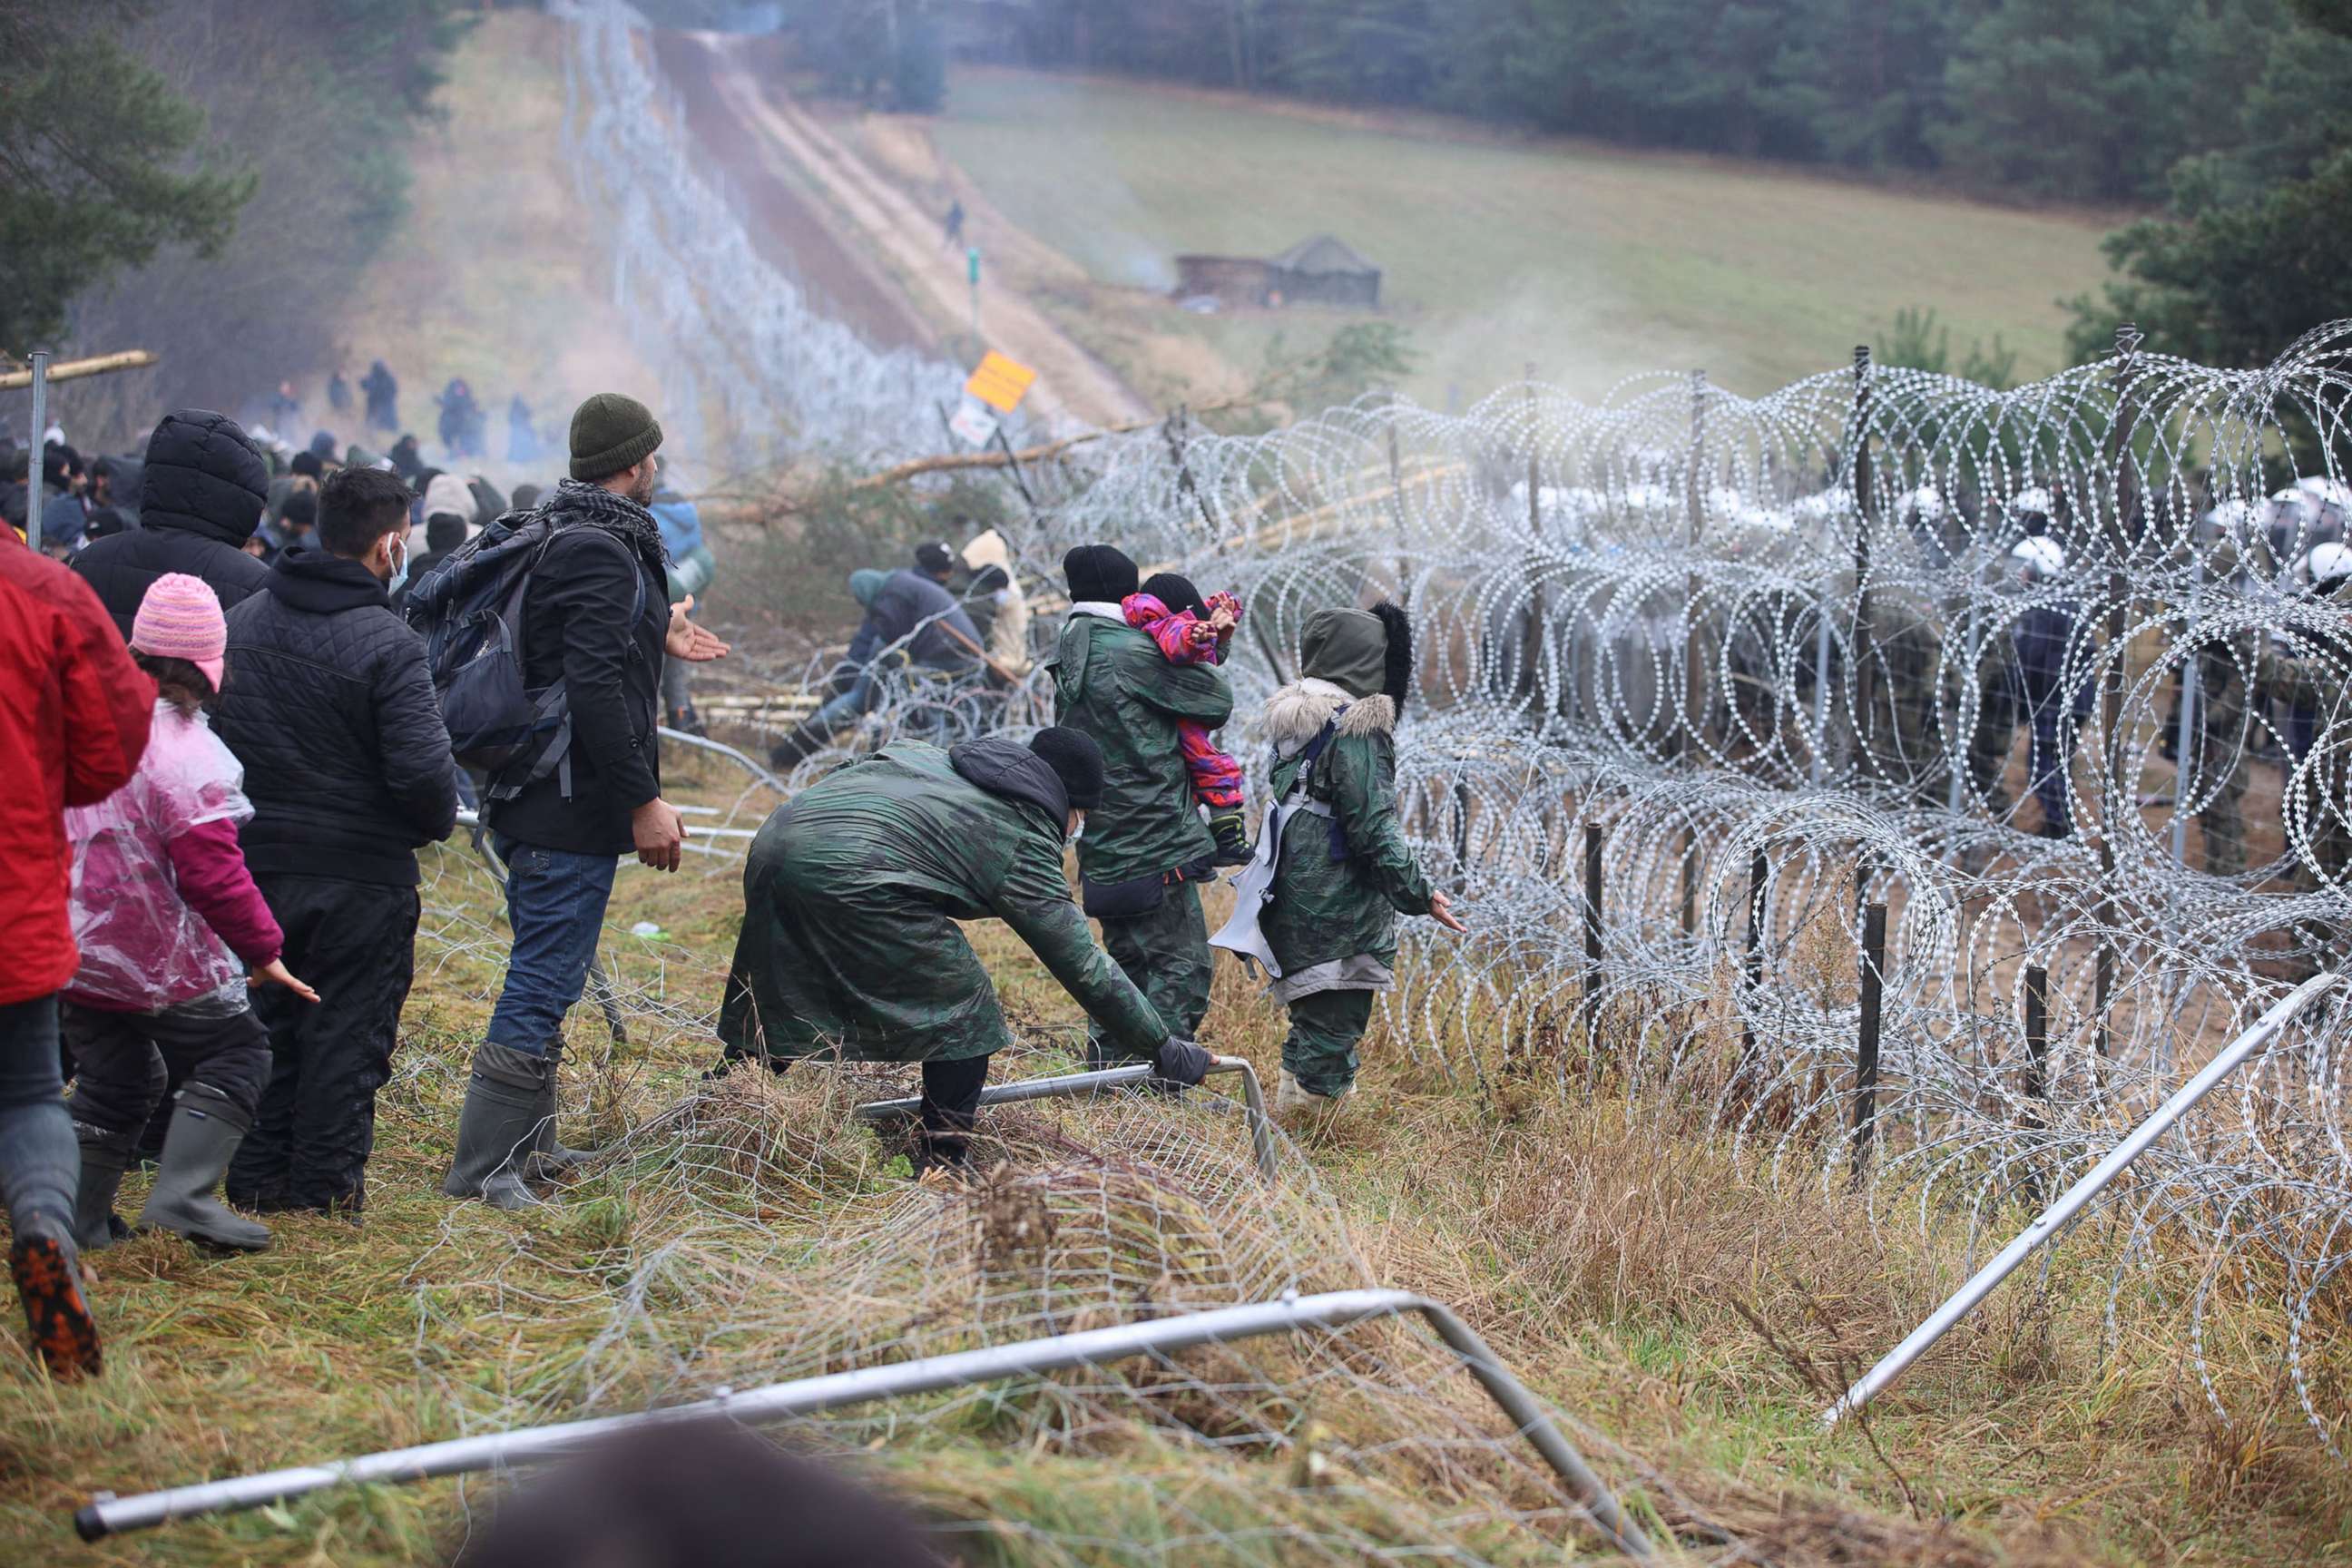 PHOTO: A picture taken on Nov. 8, 2021, shows migrants at the Belarusian-Polish border.